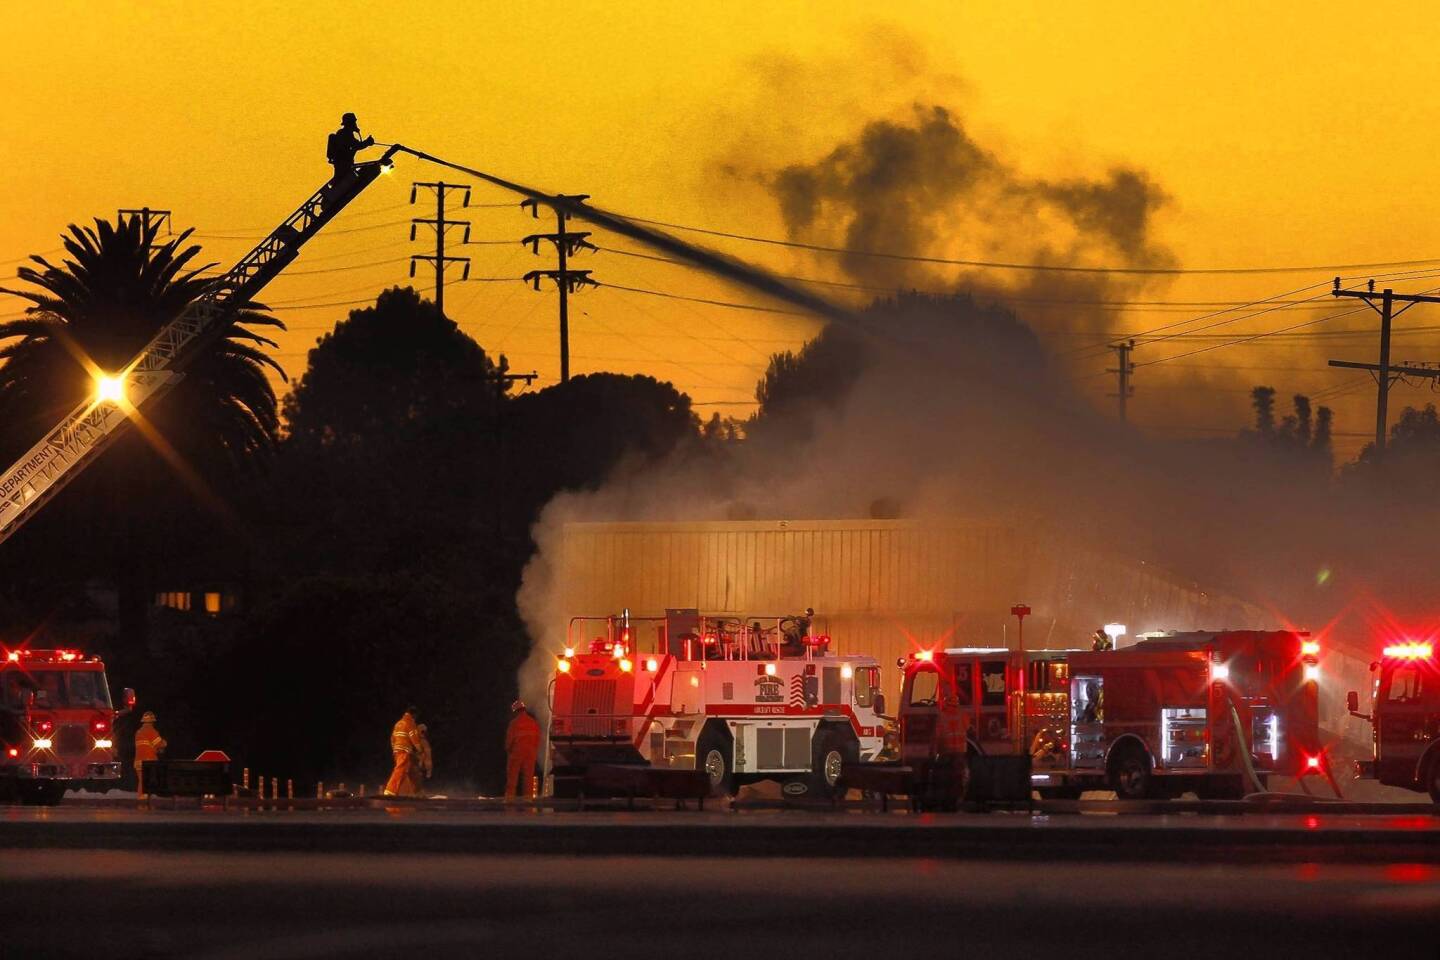 Firefighters battle a blaze at Santa Monica Airport that began when a small jet veered off the runway and crashed into a hangar. The fire spread to two other buildings.